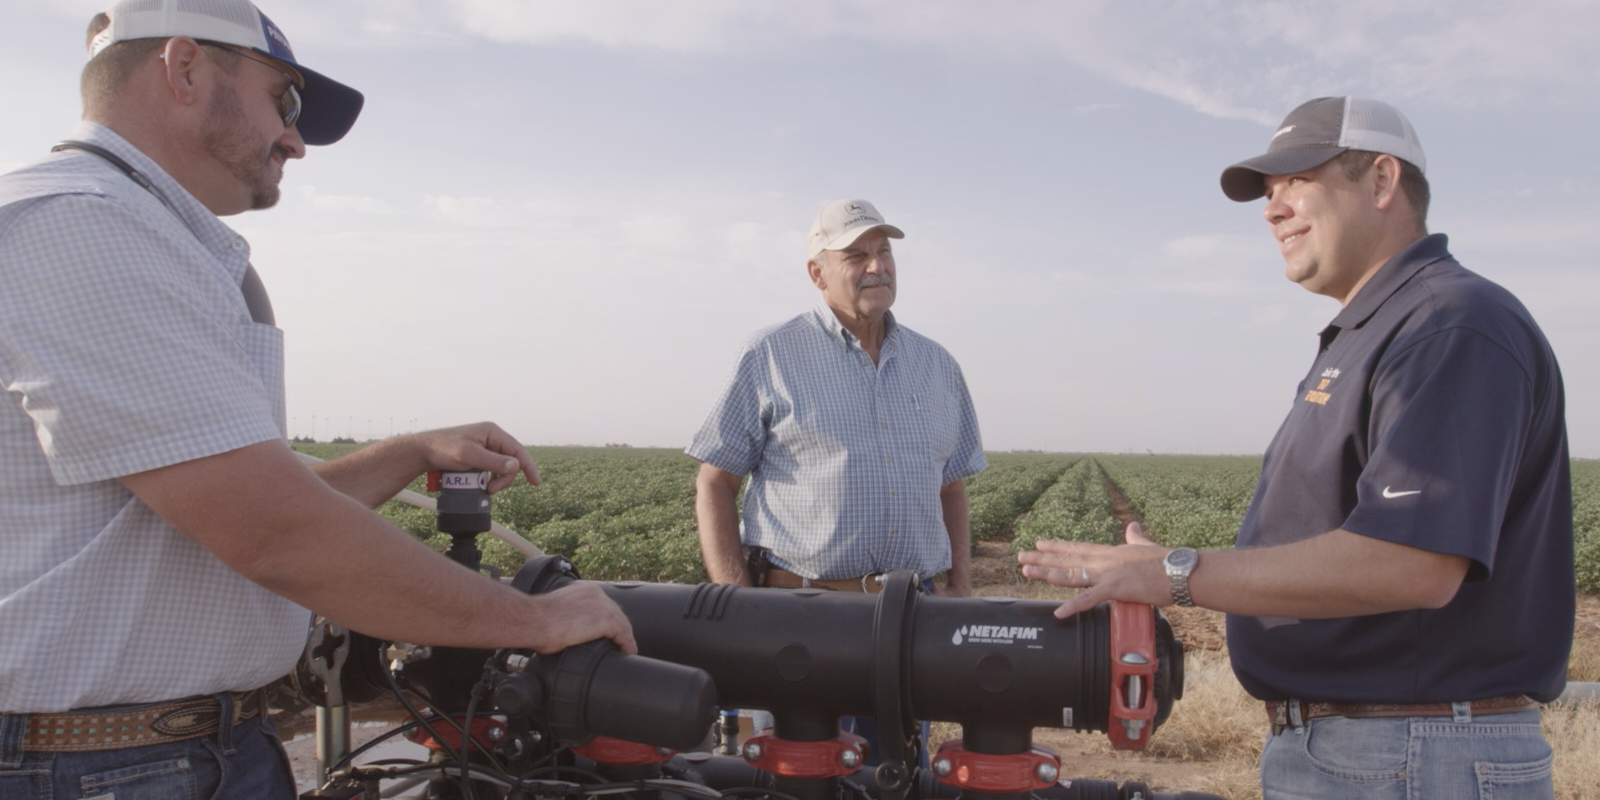 Three farmers discussing irrigation technology in a cotton field